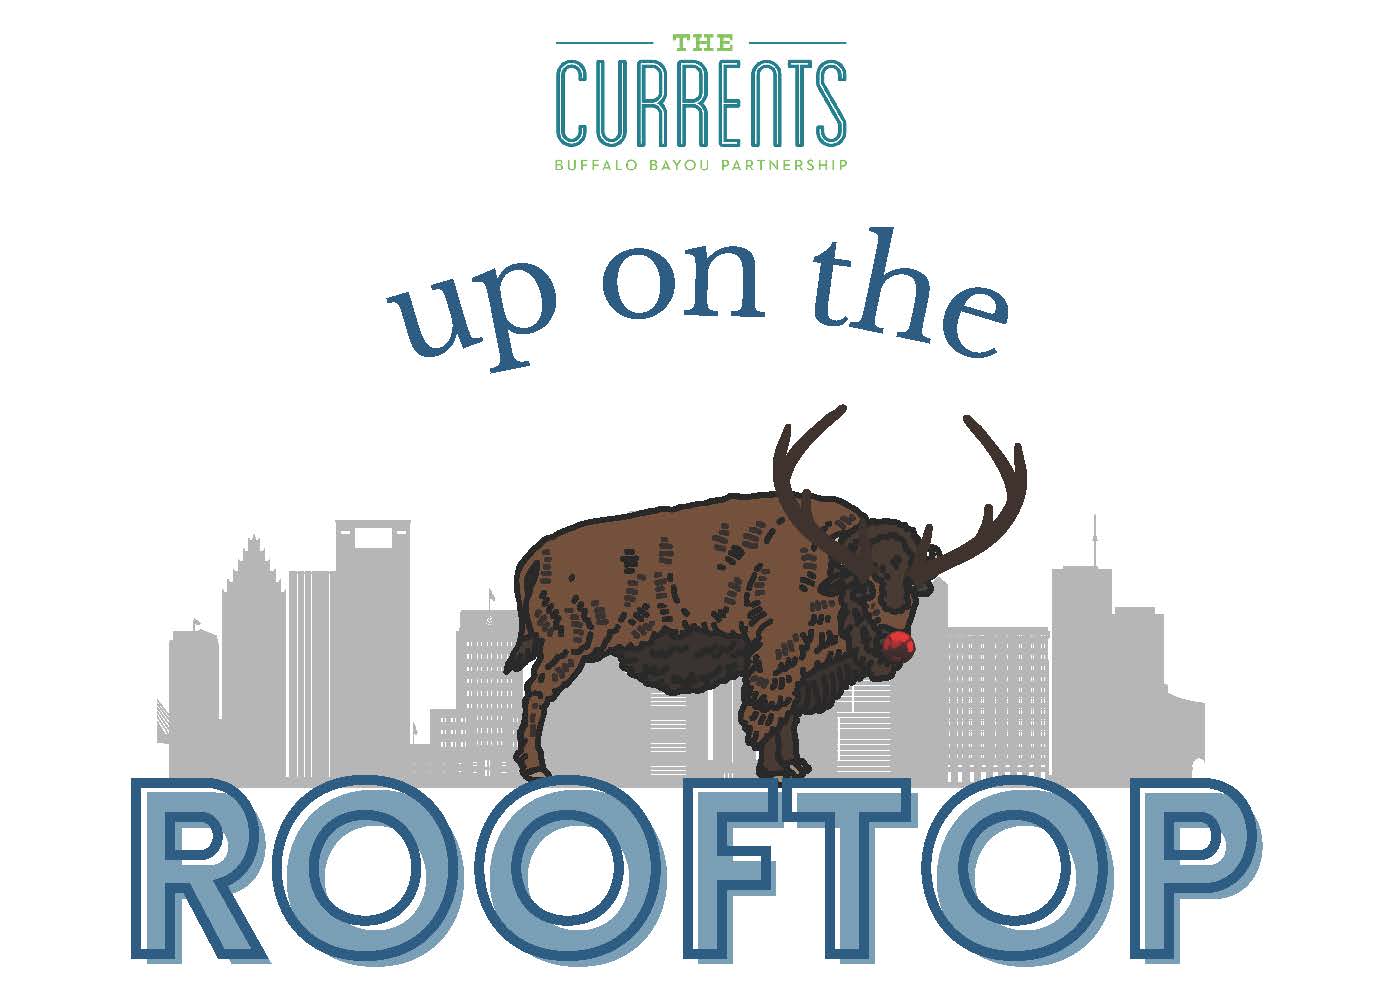 Image Up on the Rooftop presented by The Currents